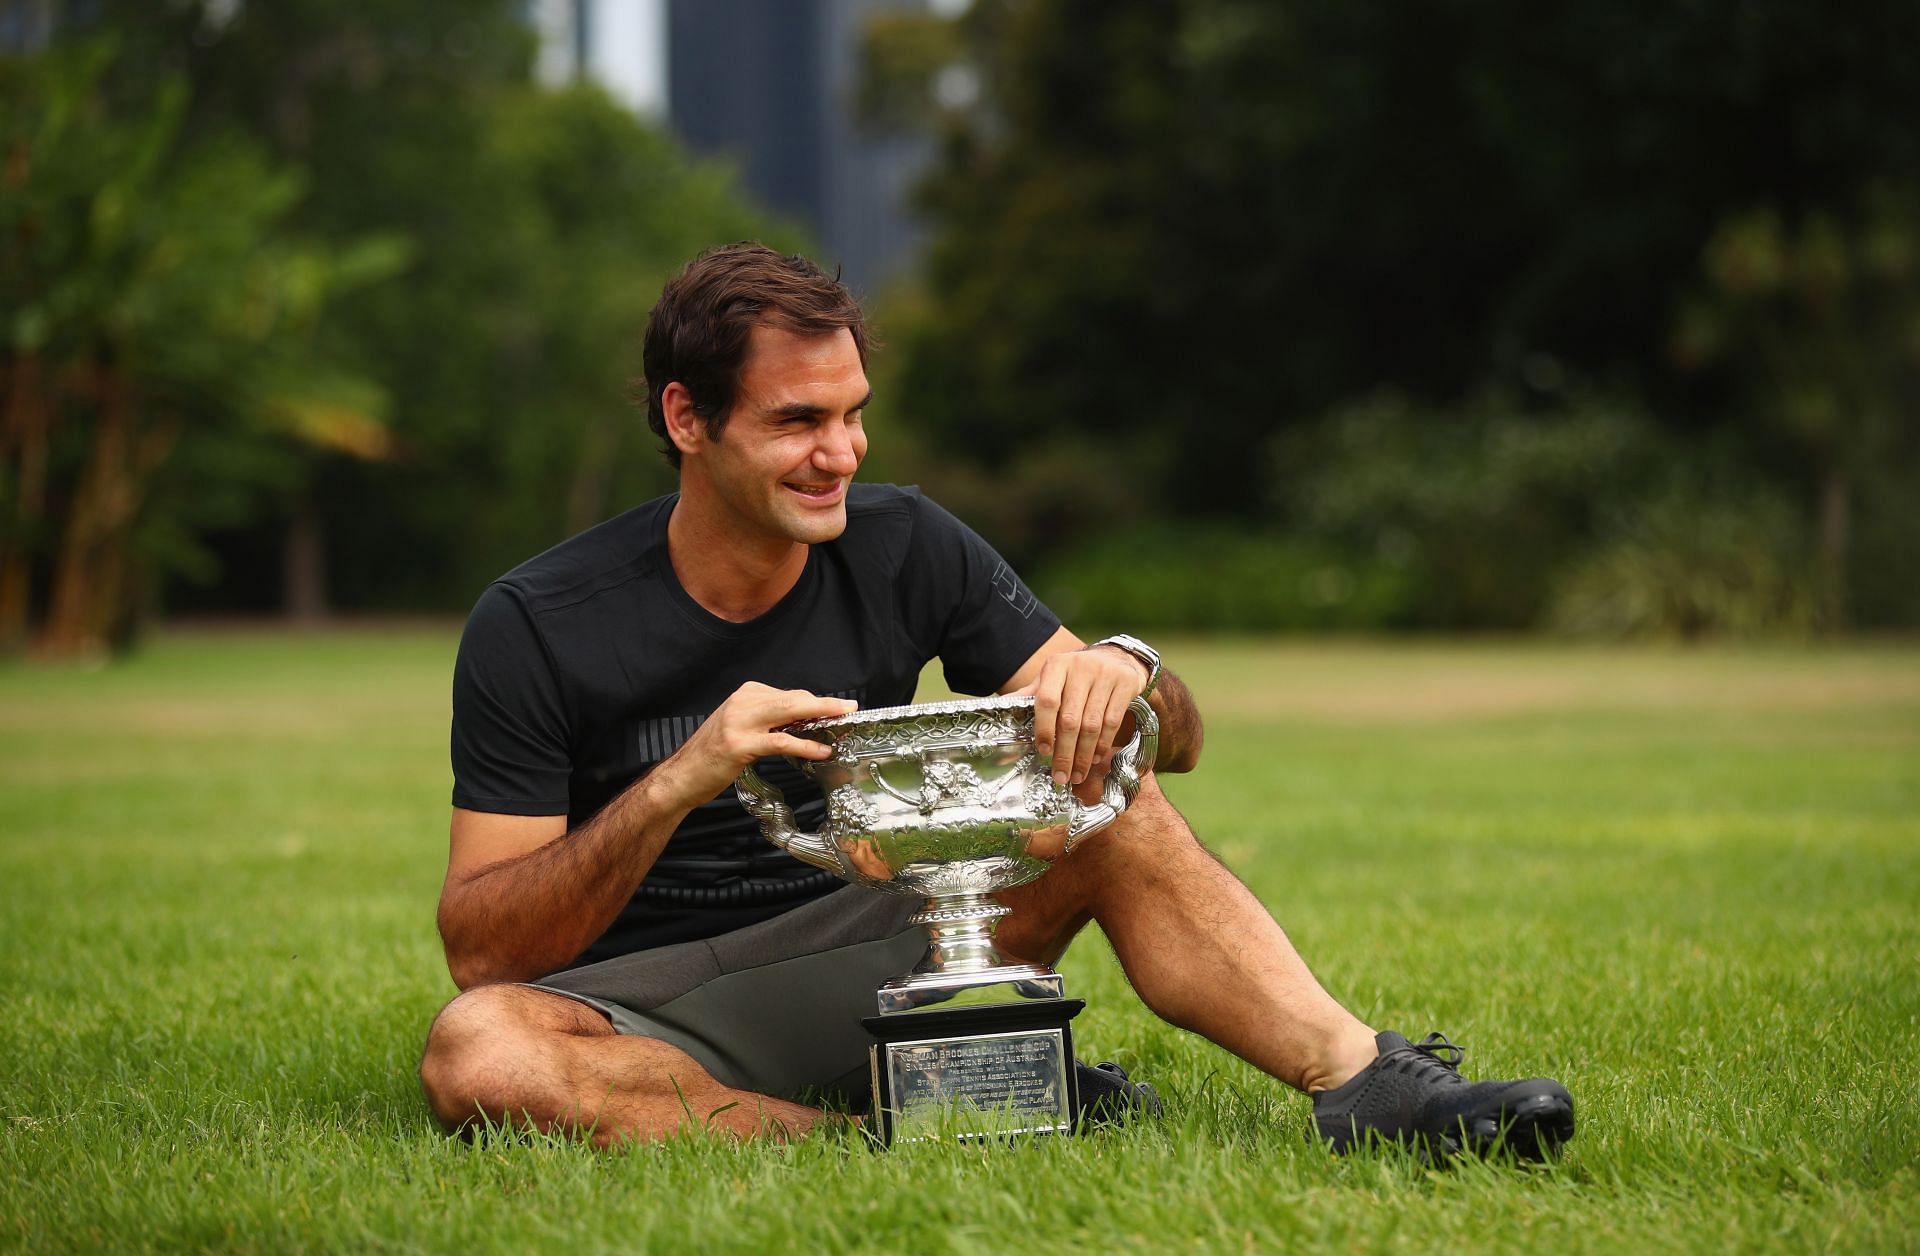 Roger Federer poses with the 2018 Australian Open trophy